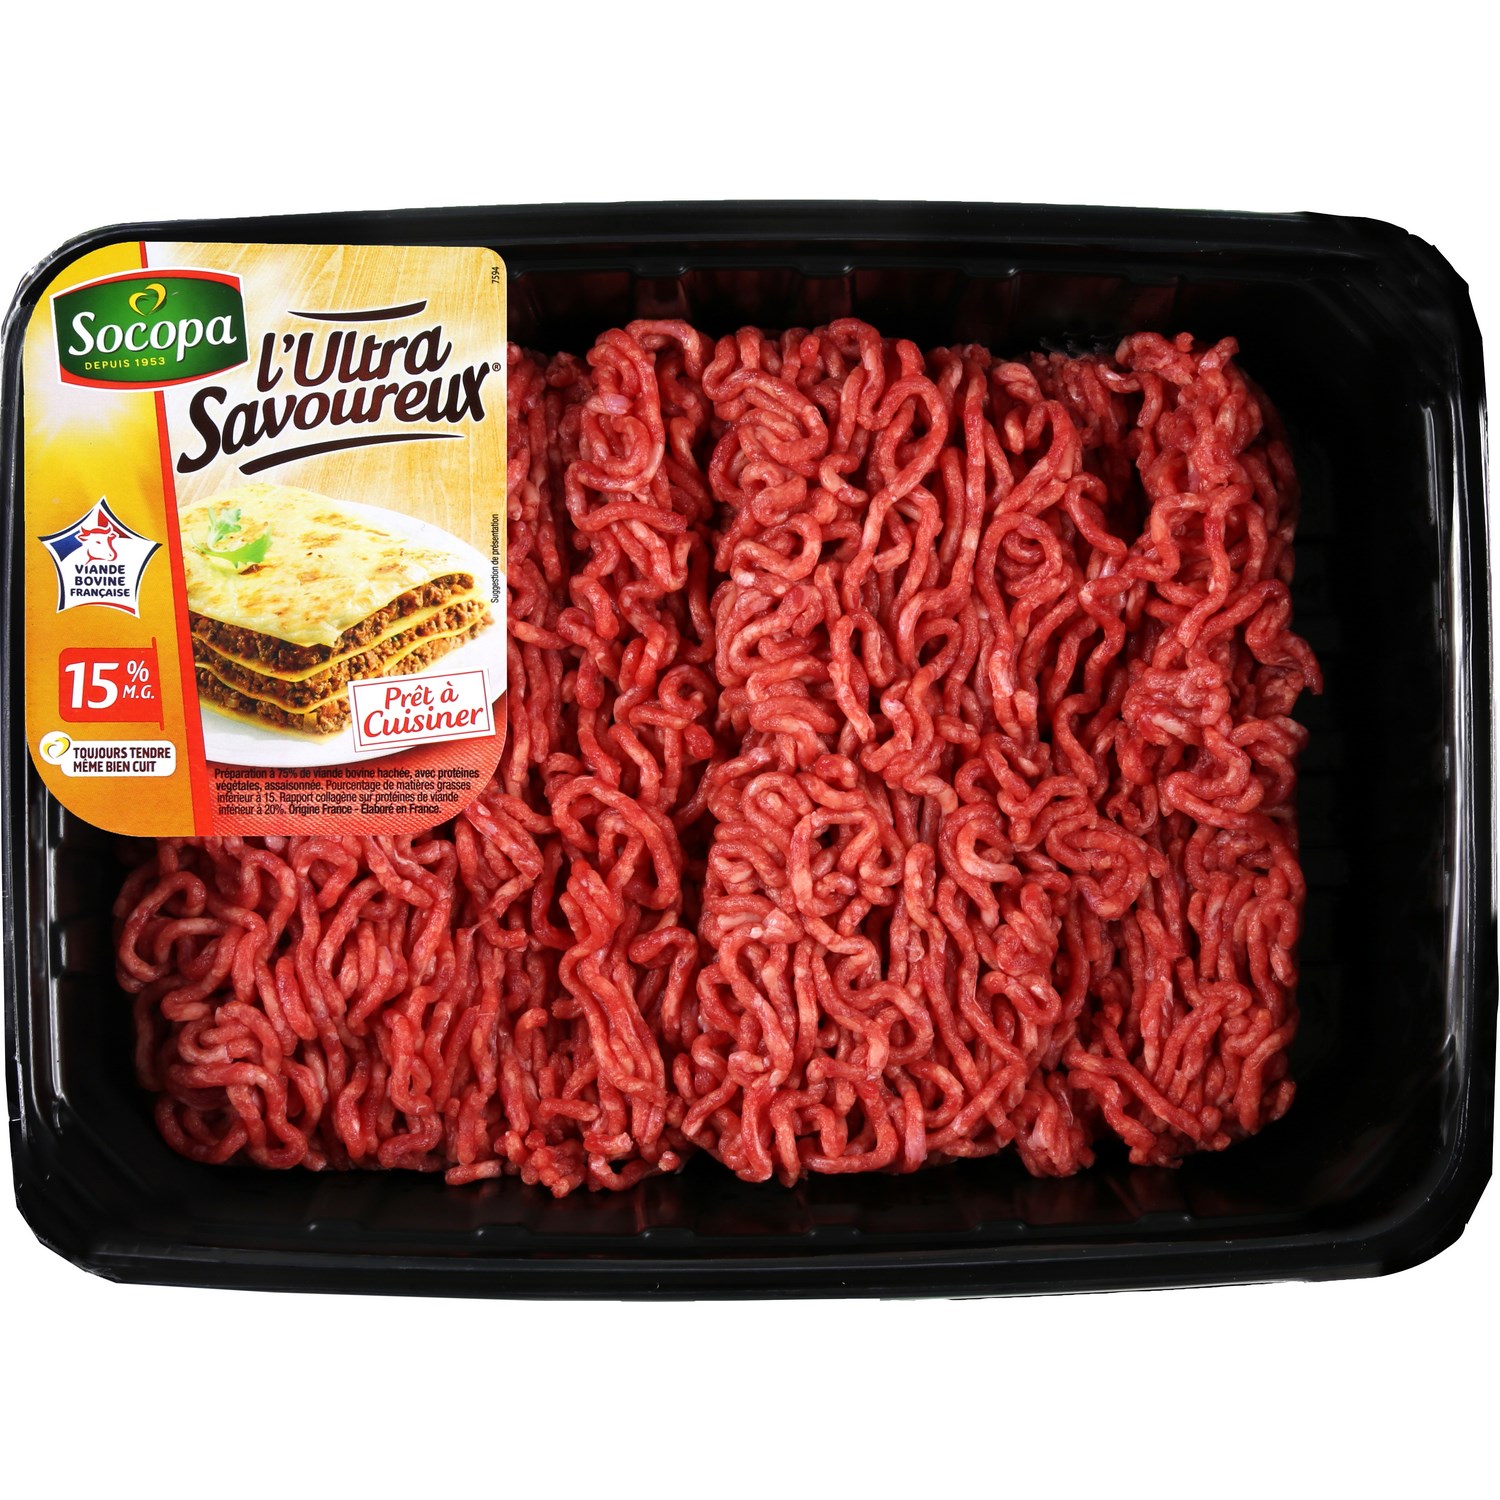 Mellow ground meat chopped with the right vegetables